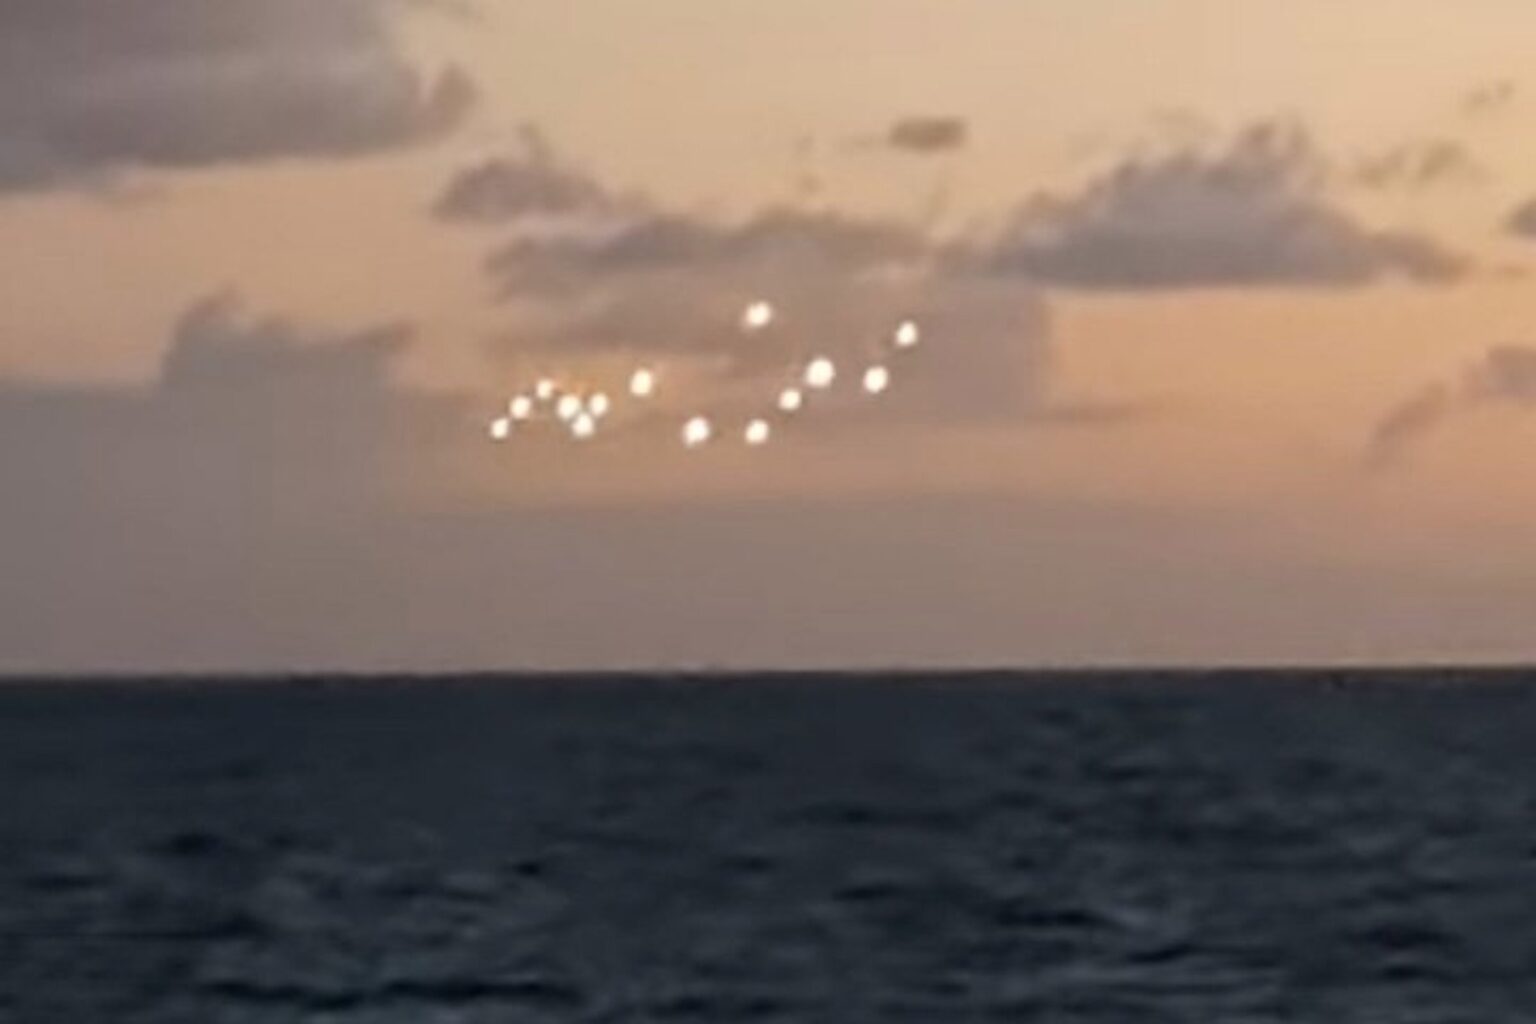 If you’re curious about what some of the most recent UFO sightings are like, then we’ve gathered a few of them for you to check out.